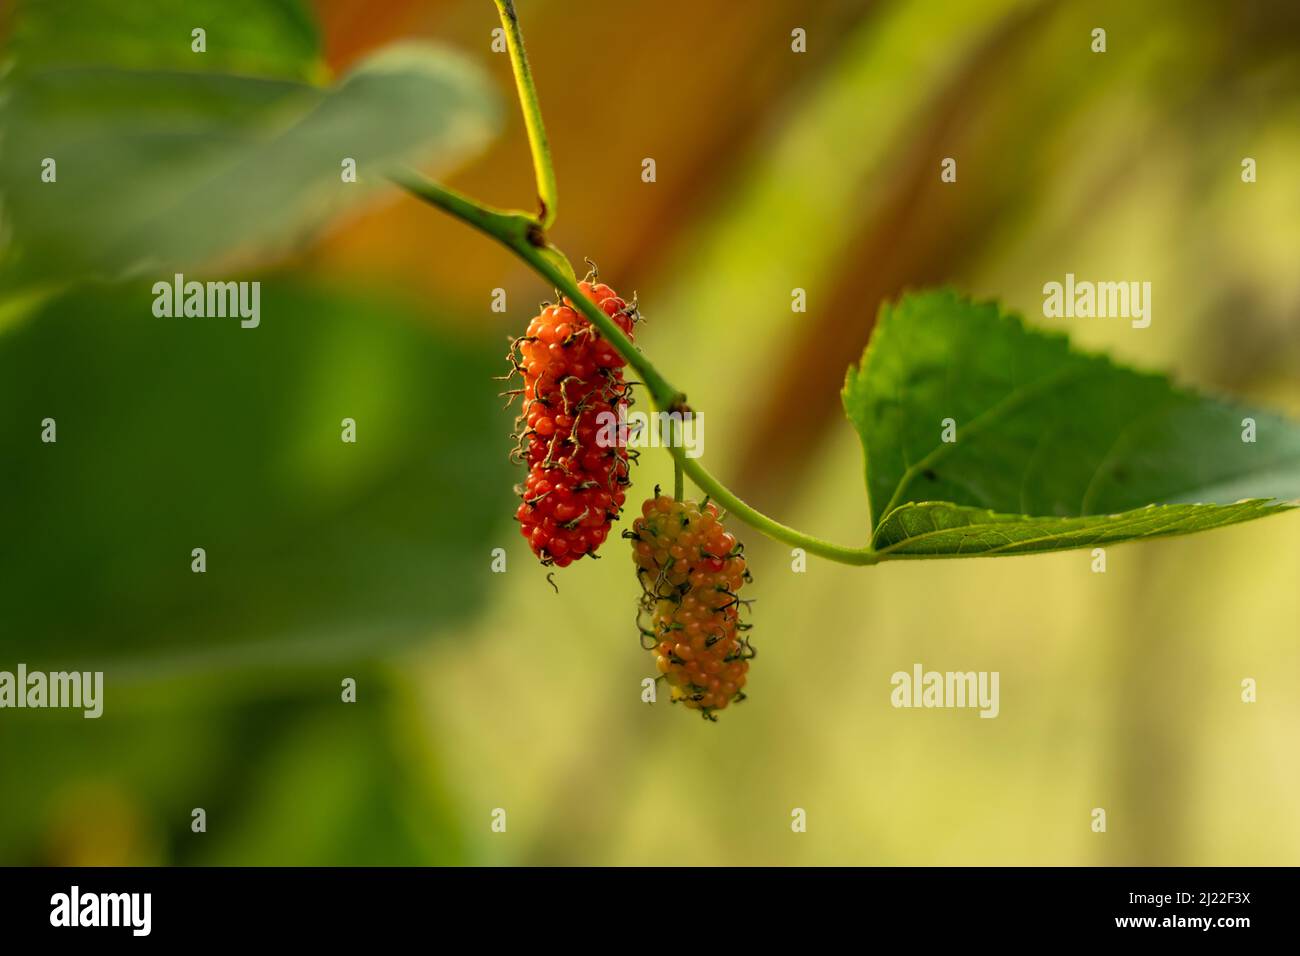 Mori folium is Mulberry is used as animal food, a poison, and a medicine. Silkworm, Russian, White Mulberry, or Morus alba, is used as a herbal me Stock Photo